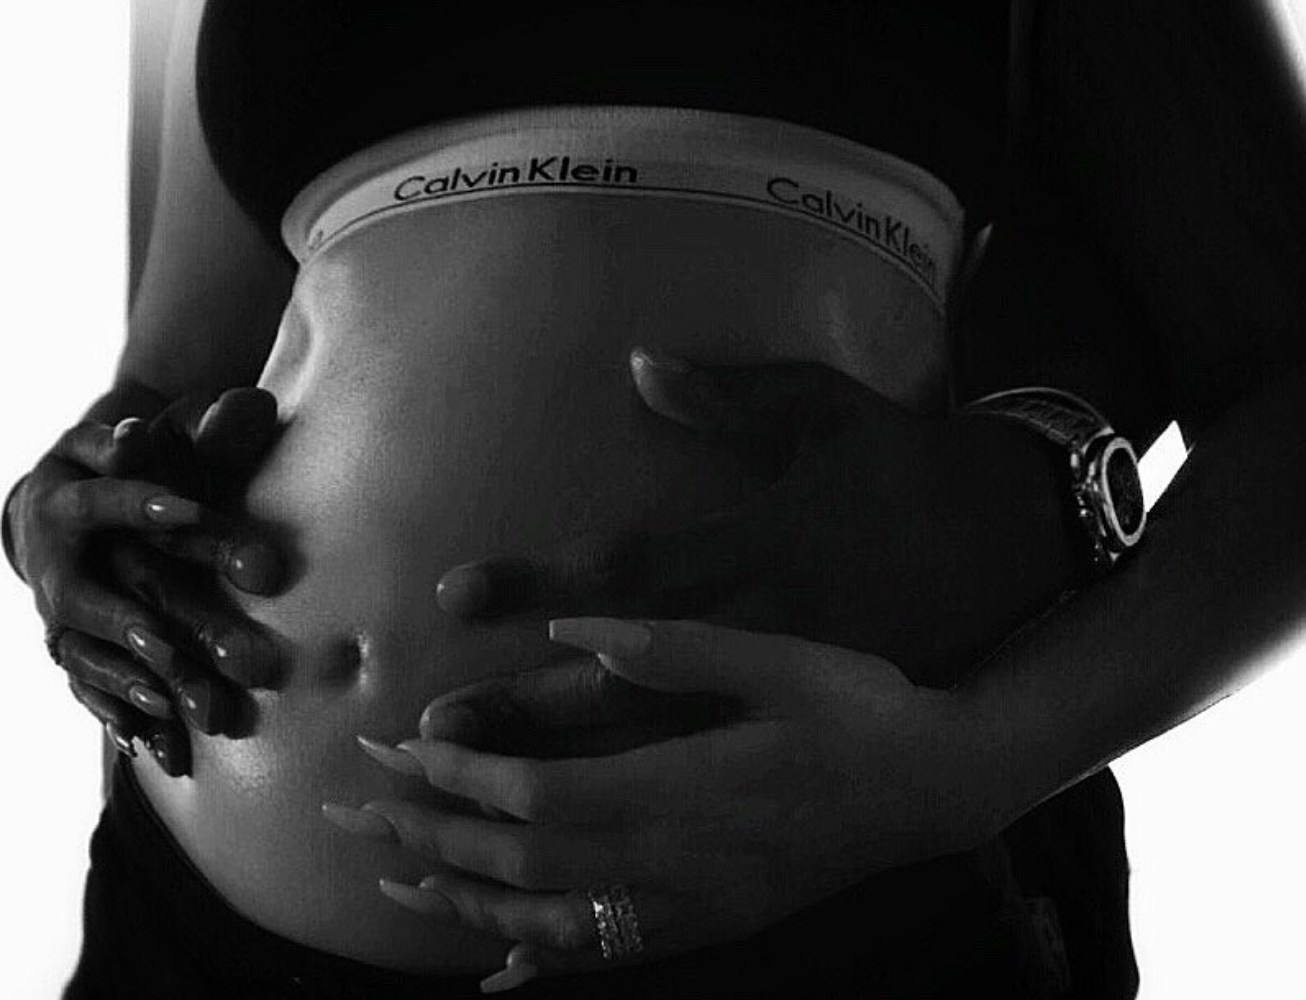 Khloe Kardashian Baby Bump Pics: See the Star's Belly On Display